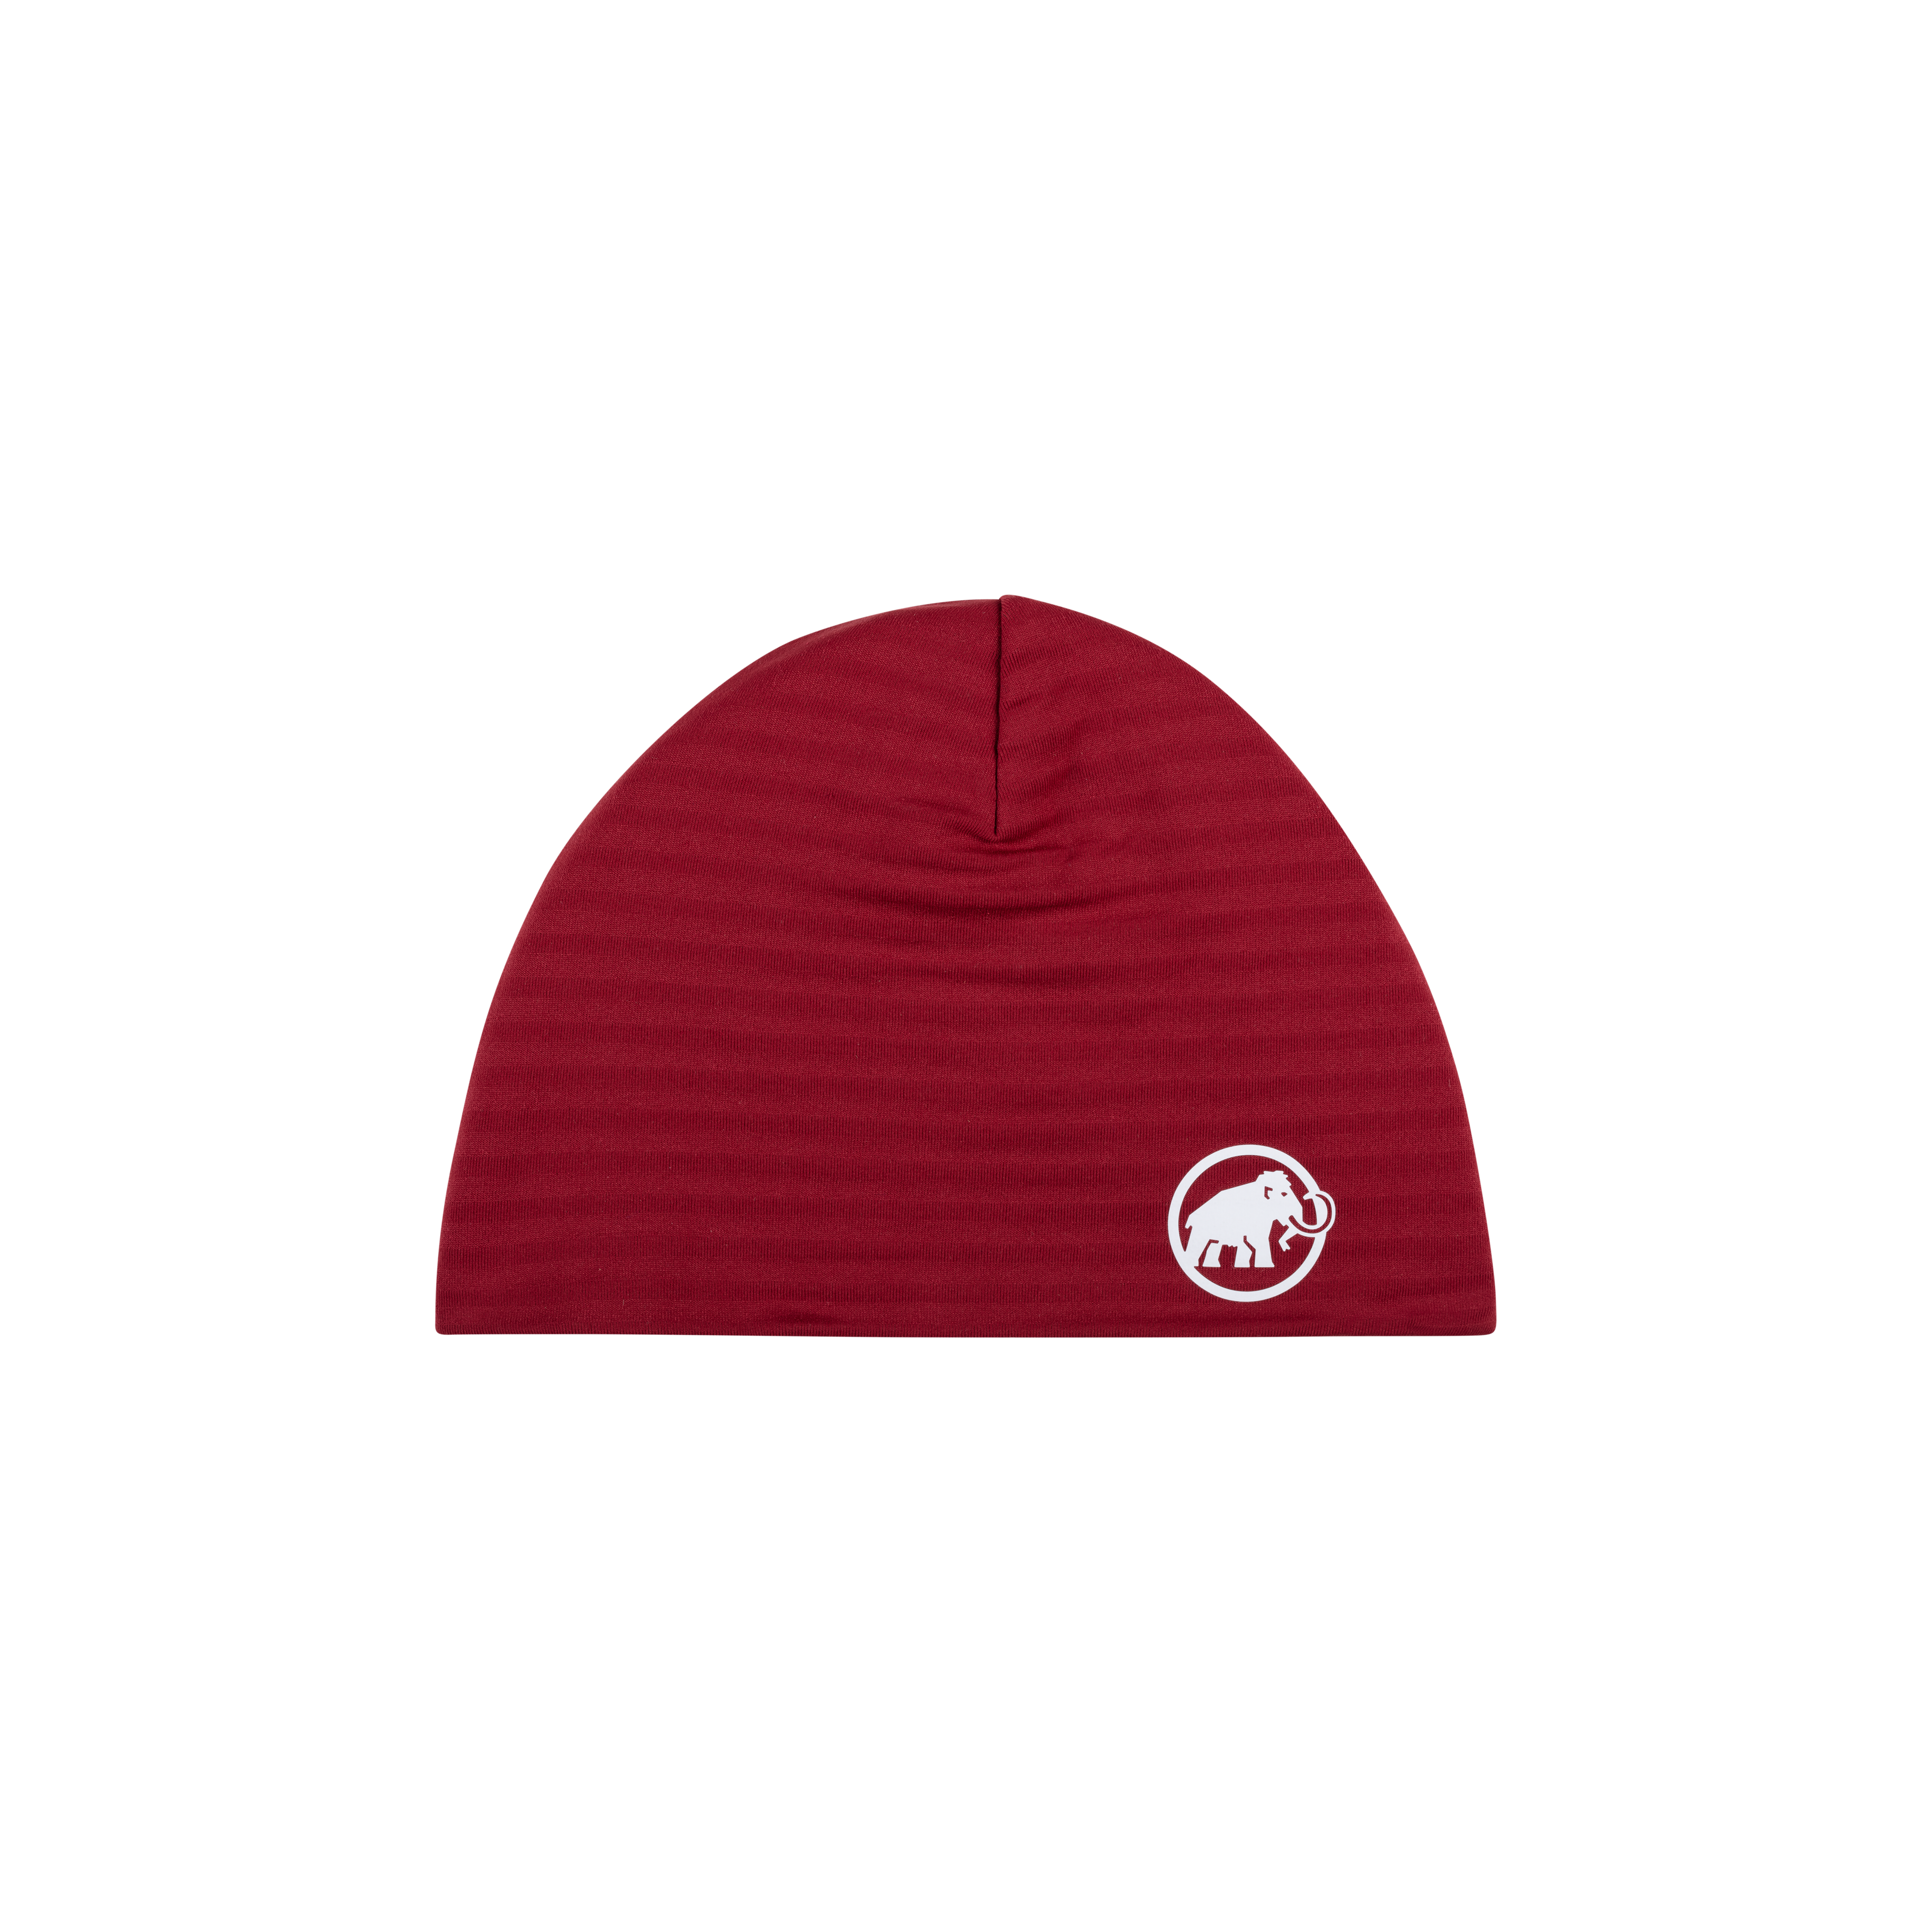 Aconcagua Light Beanie - blood red, one size thumbnail